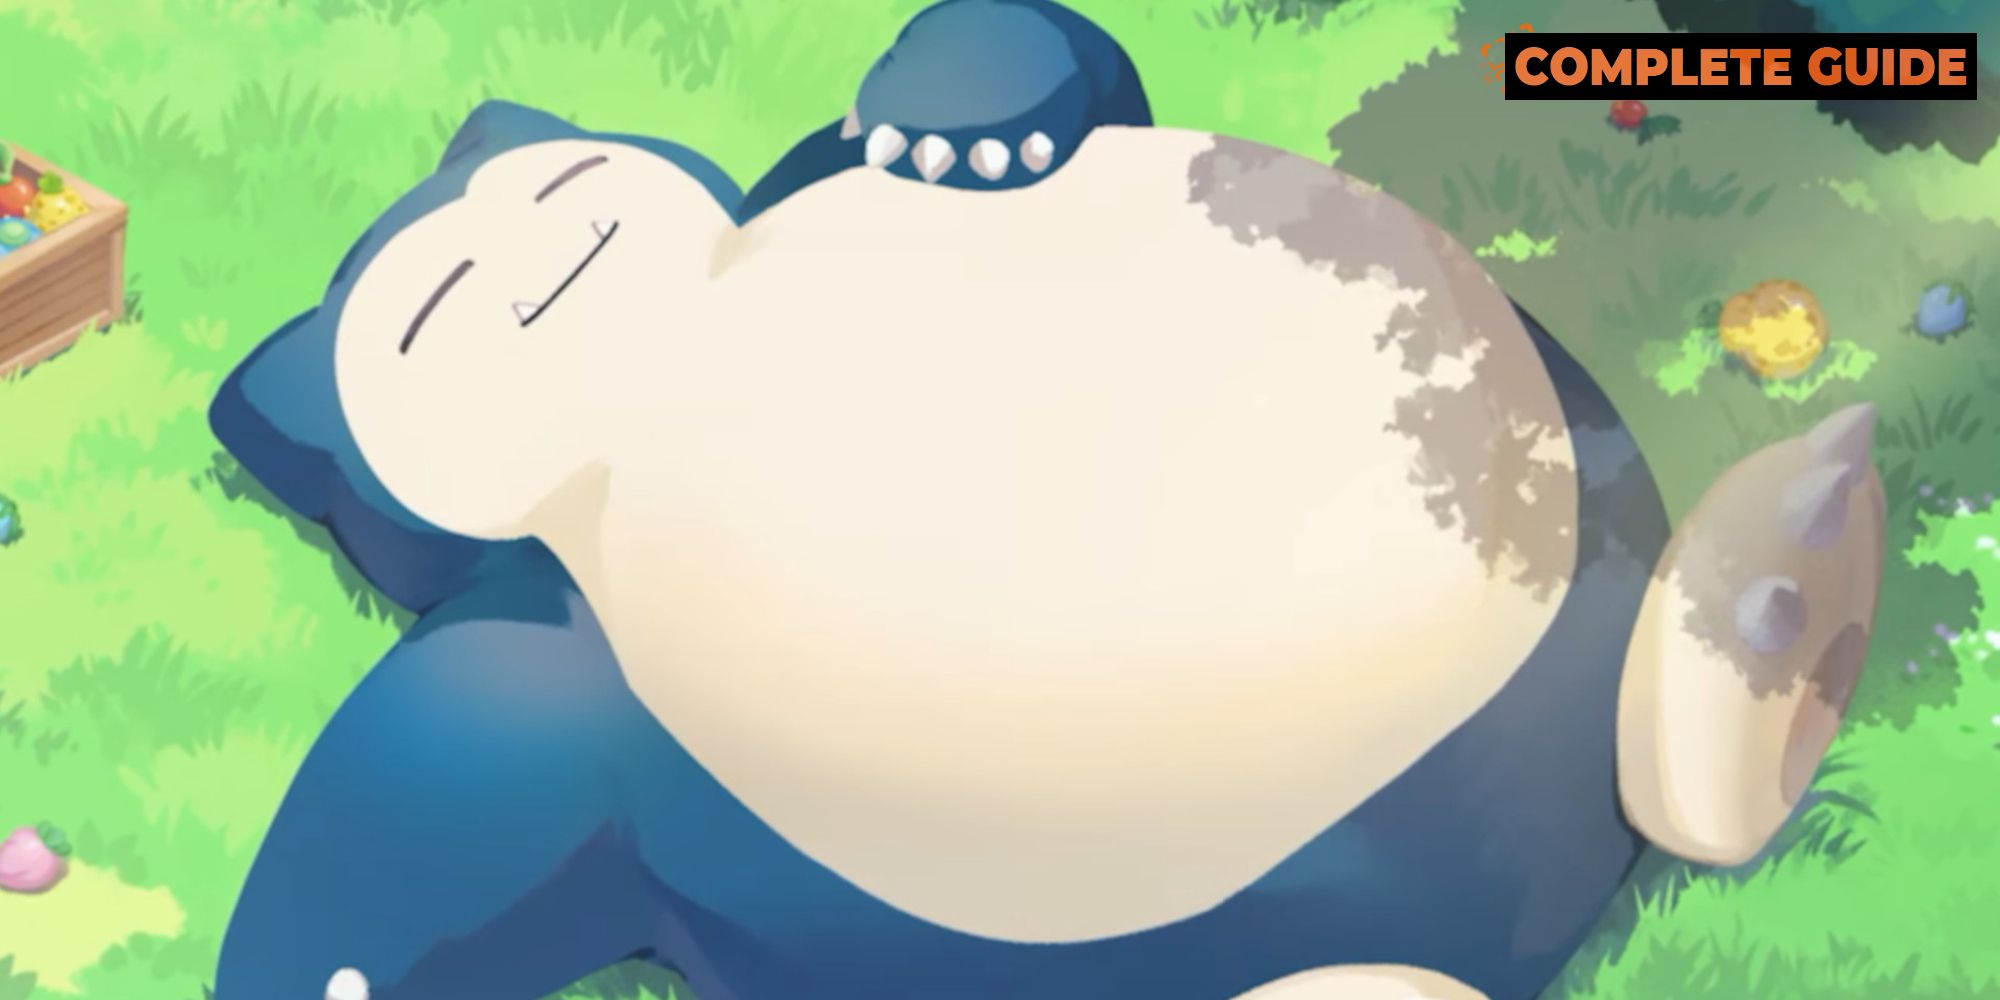 Everything You Need To Know About Pokemon Sleep